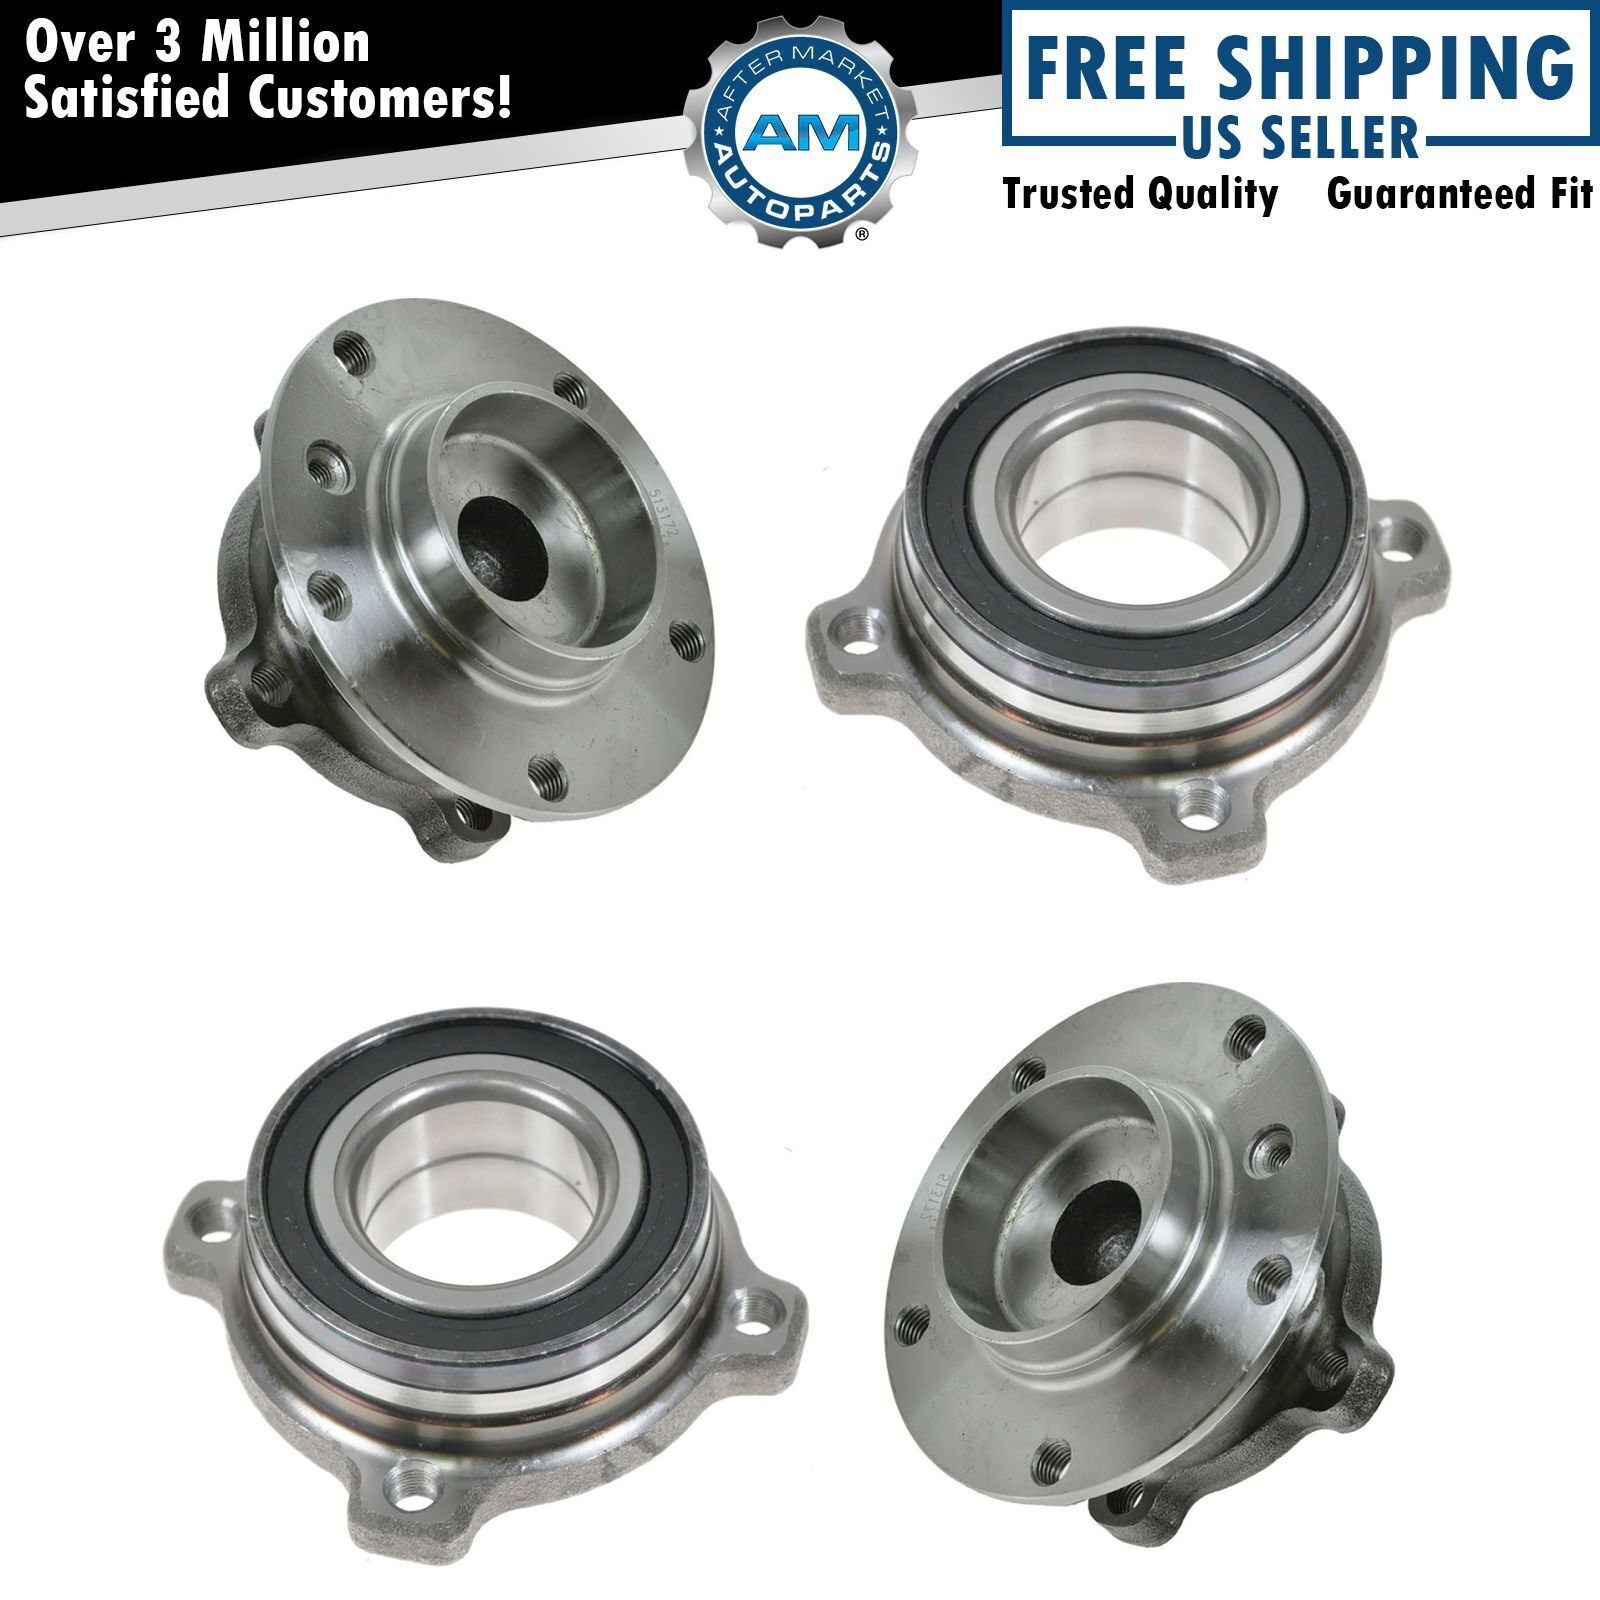 Front & Rear Wheel Bearing & Hub Assembly Kit Set of 4 for BMW 5 Series